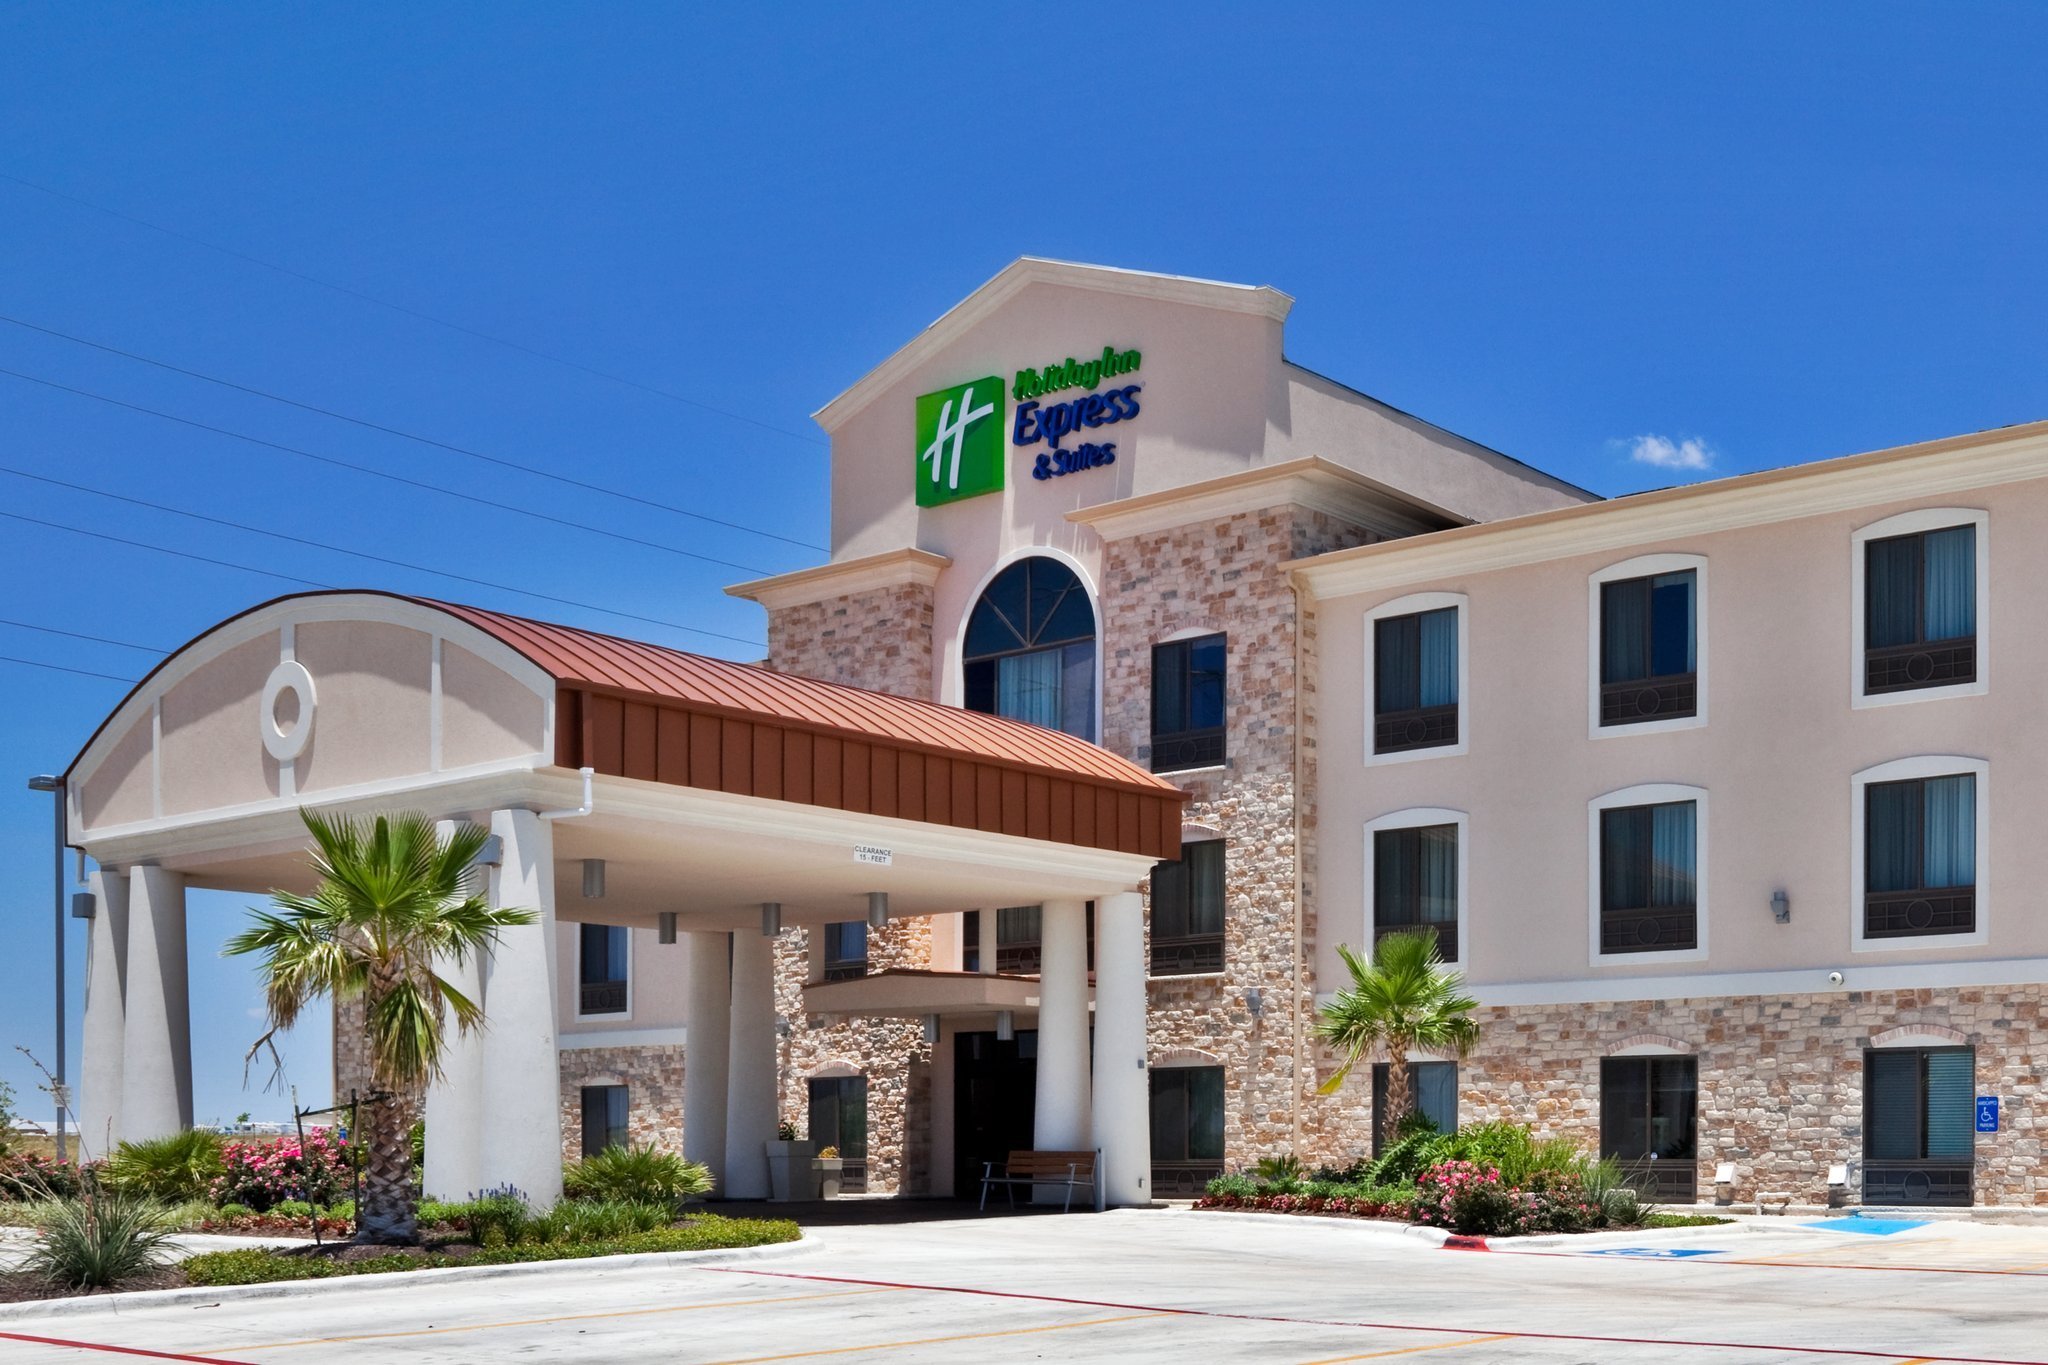 Photo of Holiday Inn Express & Suites Austin NE -Hutto, Hutto, TX